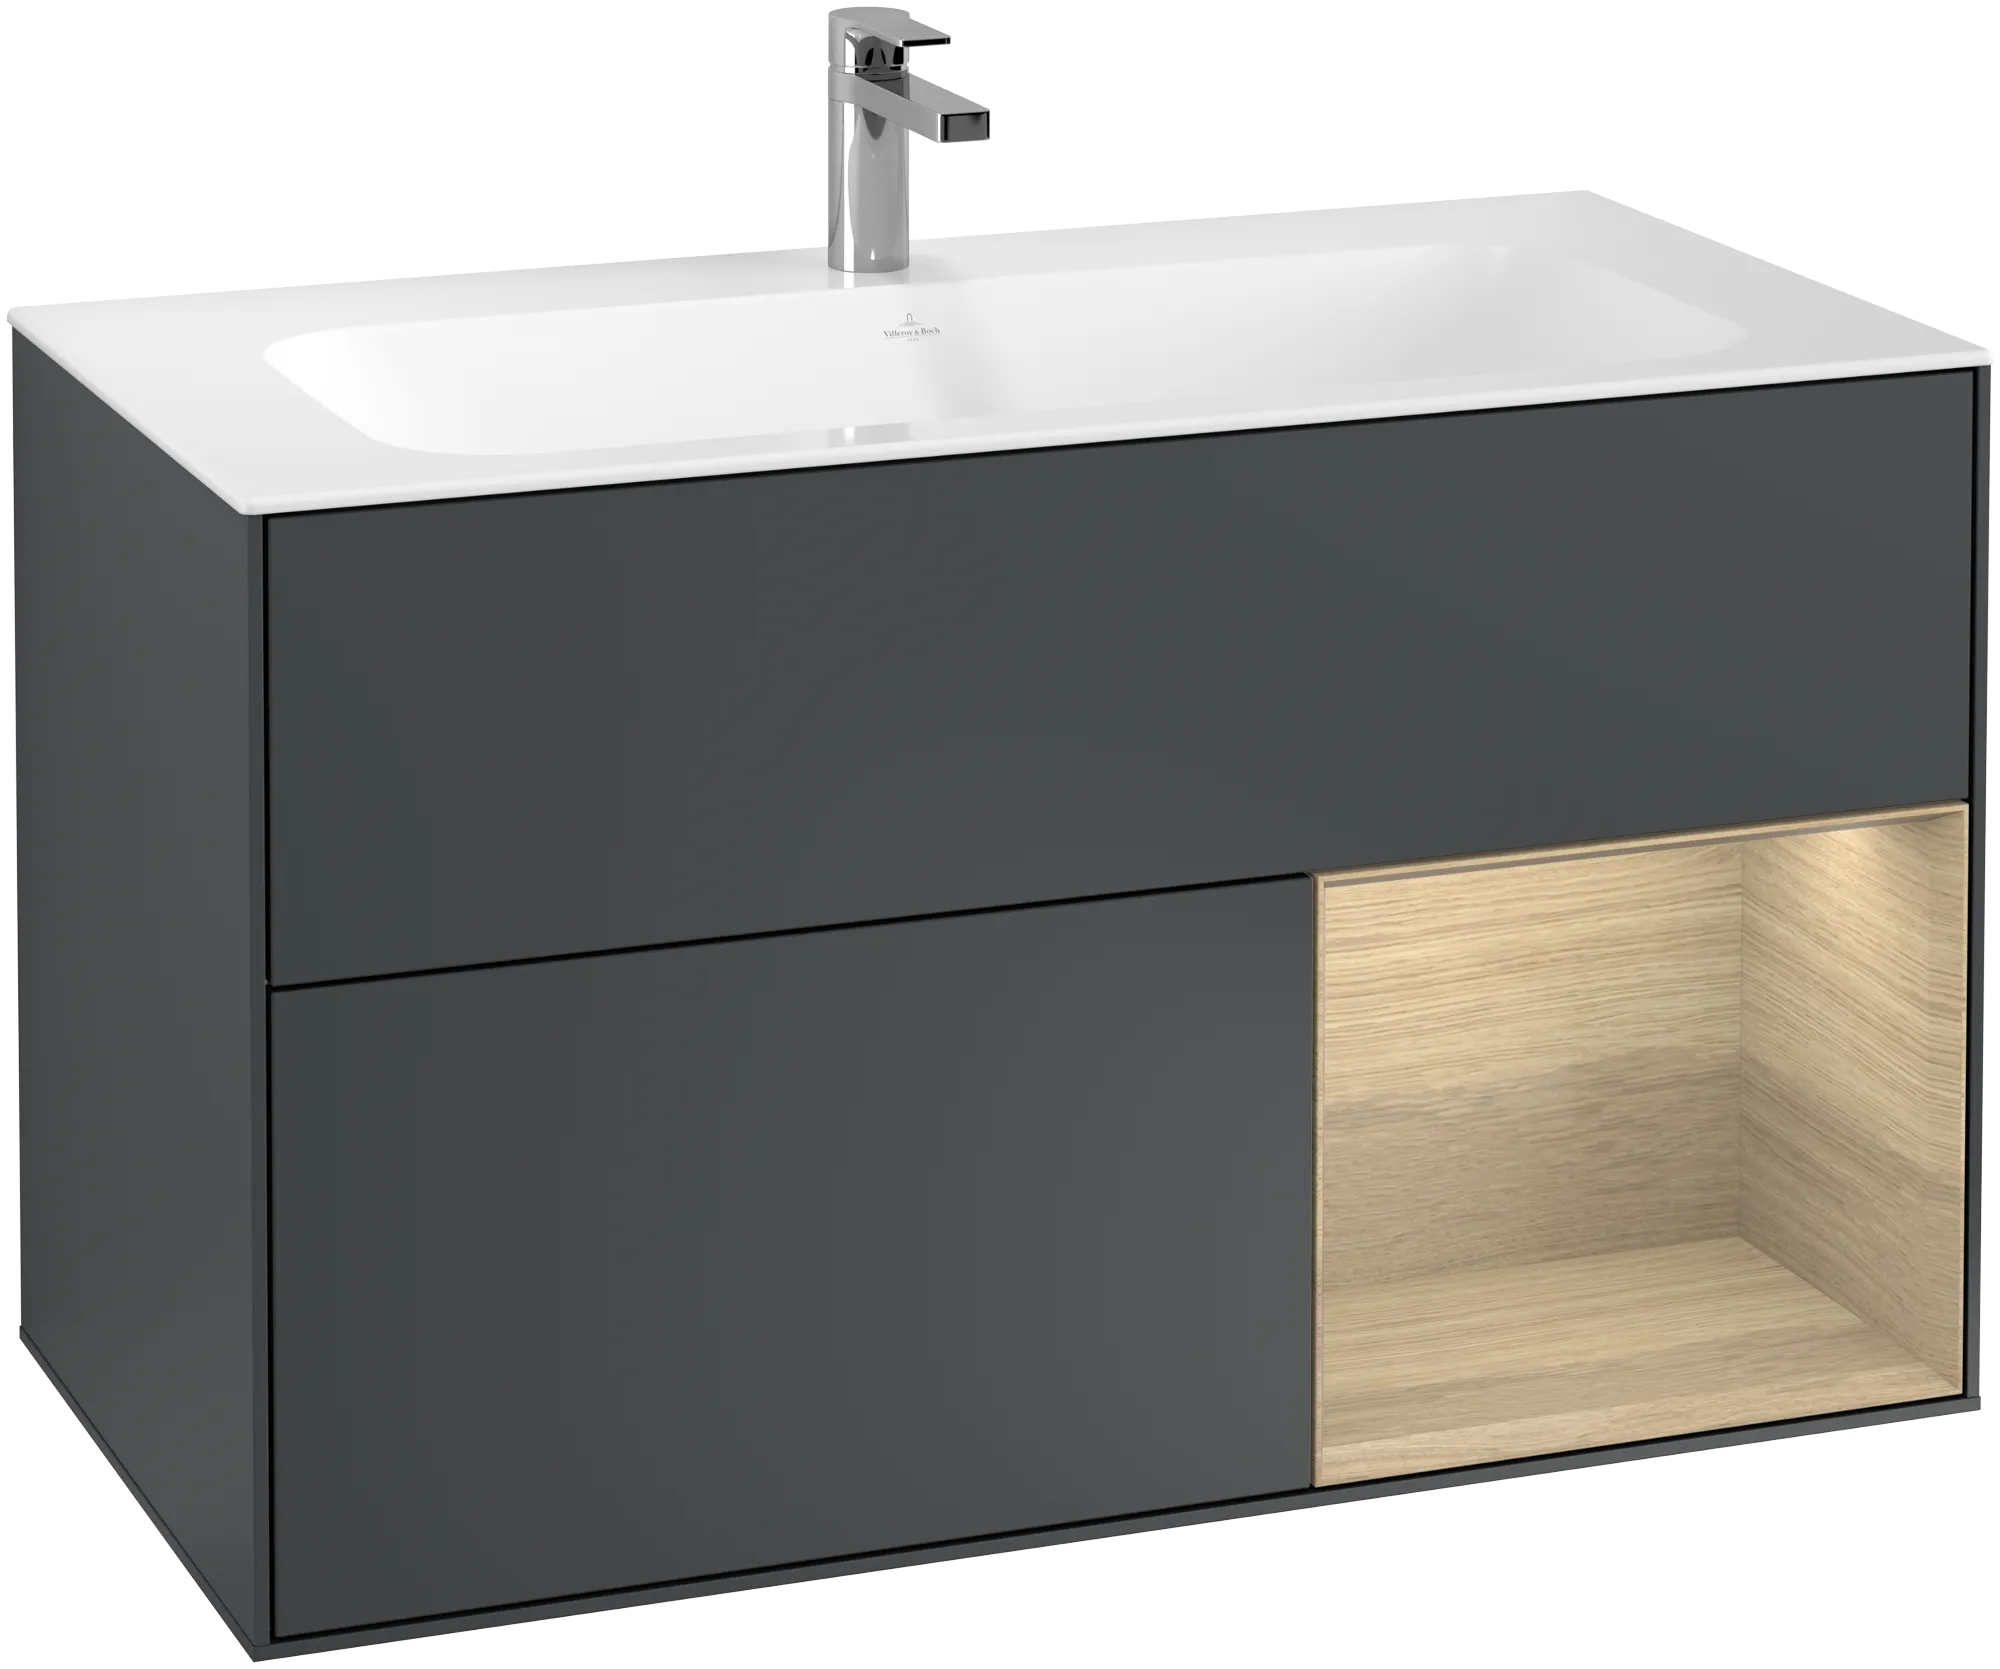 Picture of VILLEROY BOCH Finion Vanity unit, with lighting, 2 pull-out compartments, 996 x 591 x 498 mm, Midnight Blue Matt Lacquer / Oak Veneer #G040PCHG